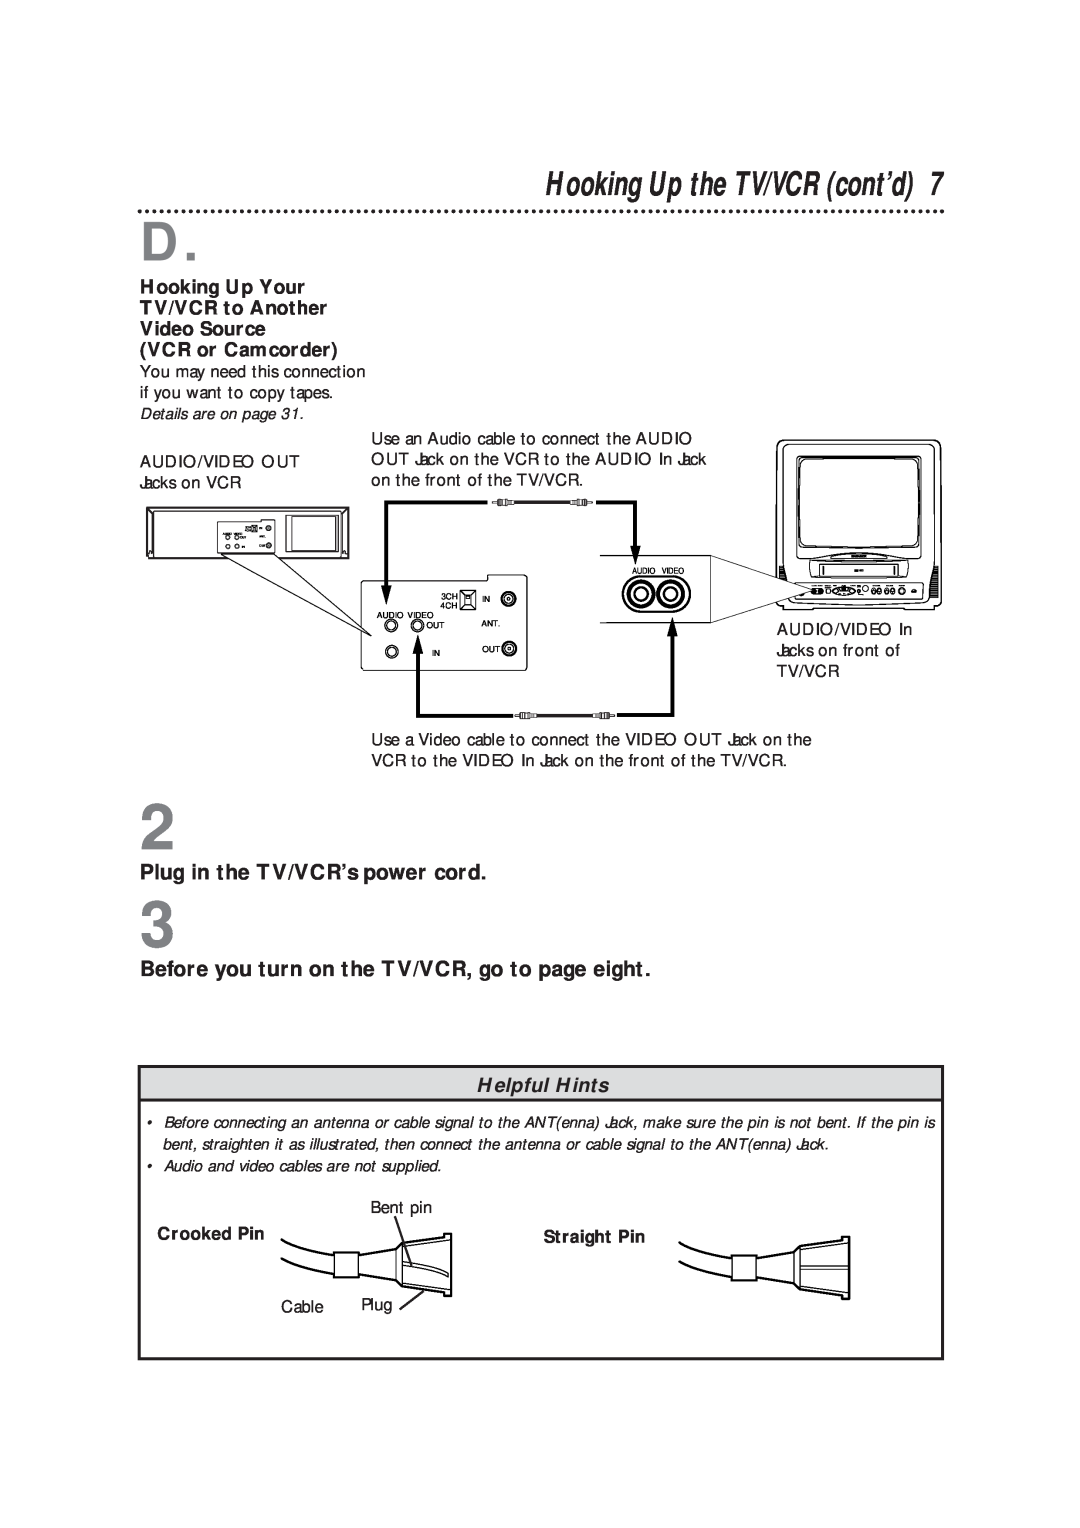 Magnavox CCB193AT owner manual Hooking Up the TV/VCR cont’d, Plug in the TV/VCR’s power cord, Helpful Hints 